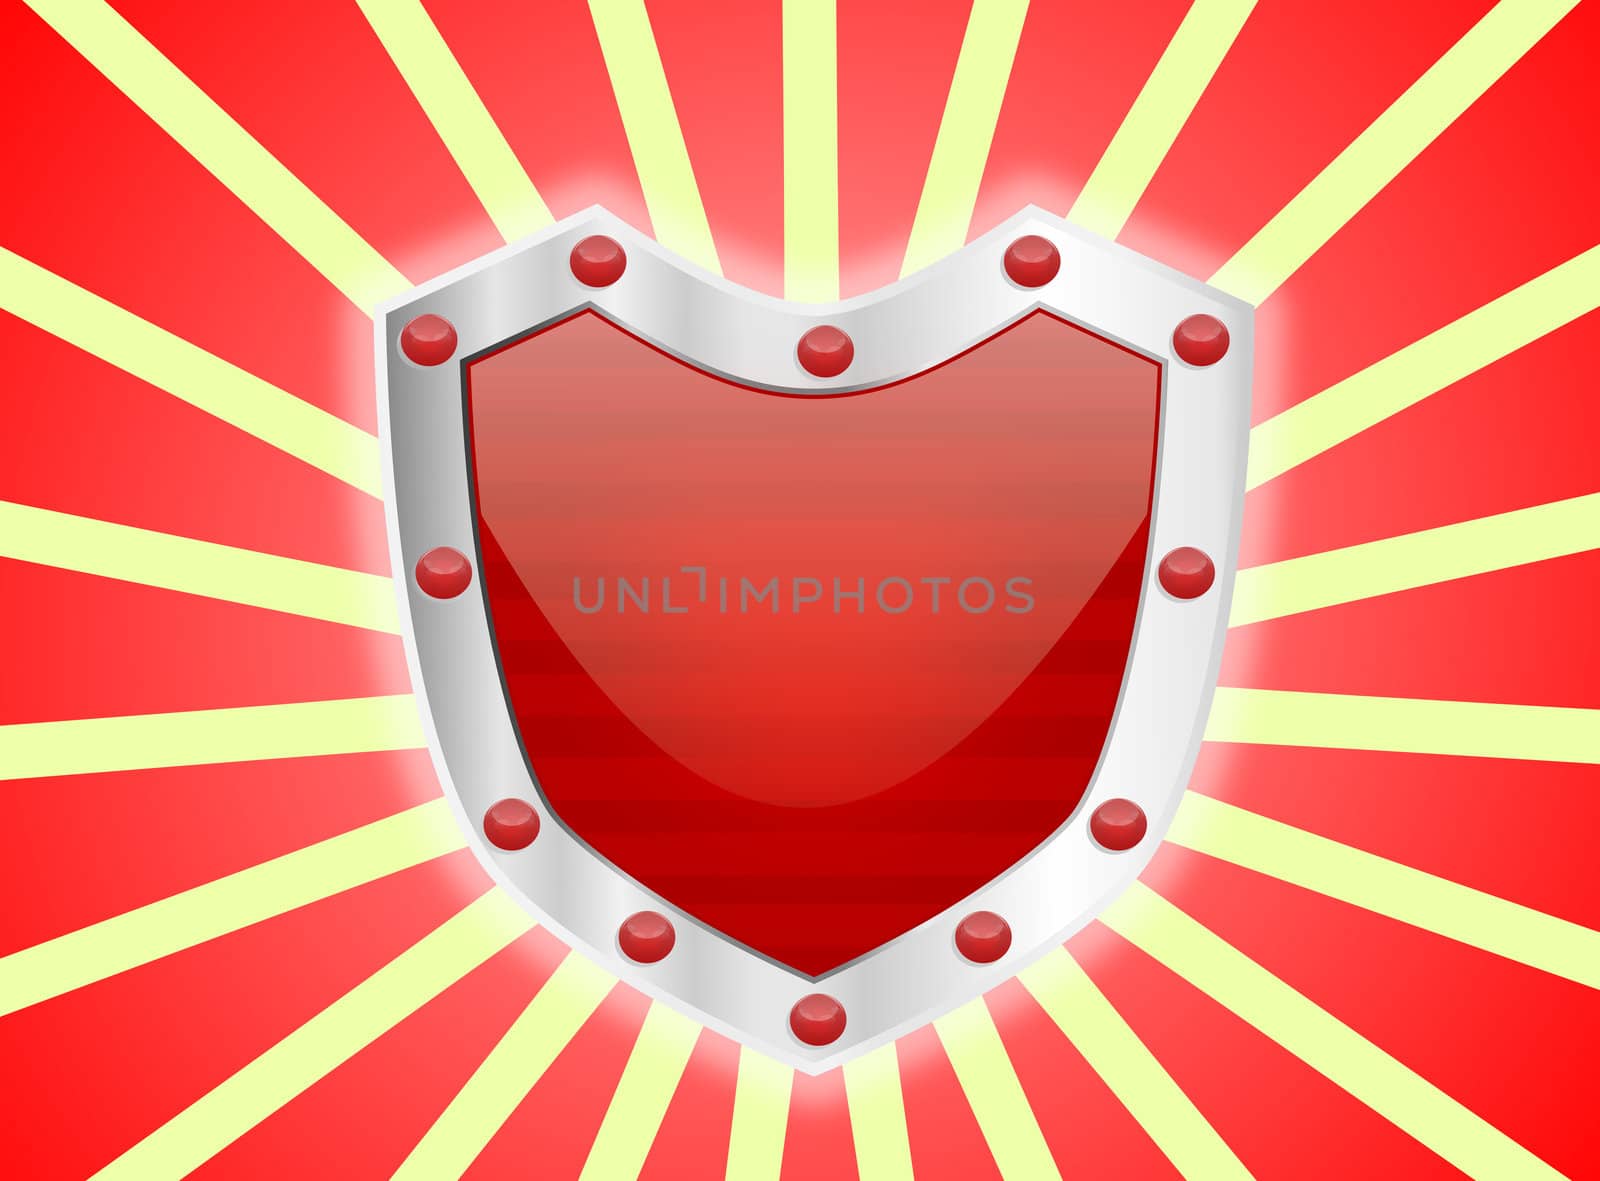 A red studded shiny red shield with silver frame